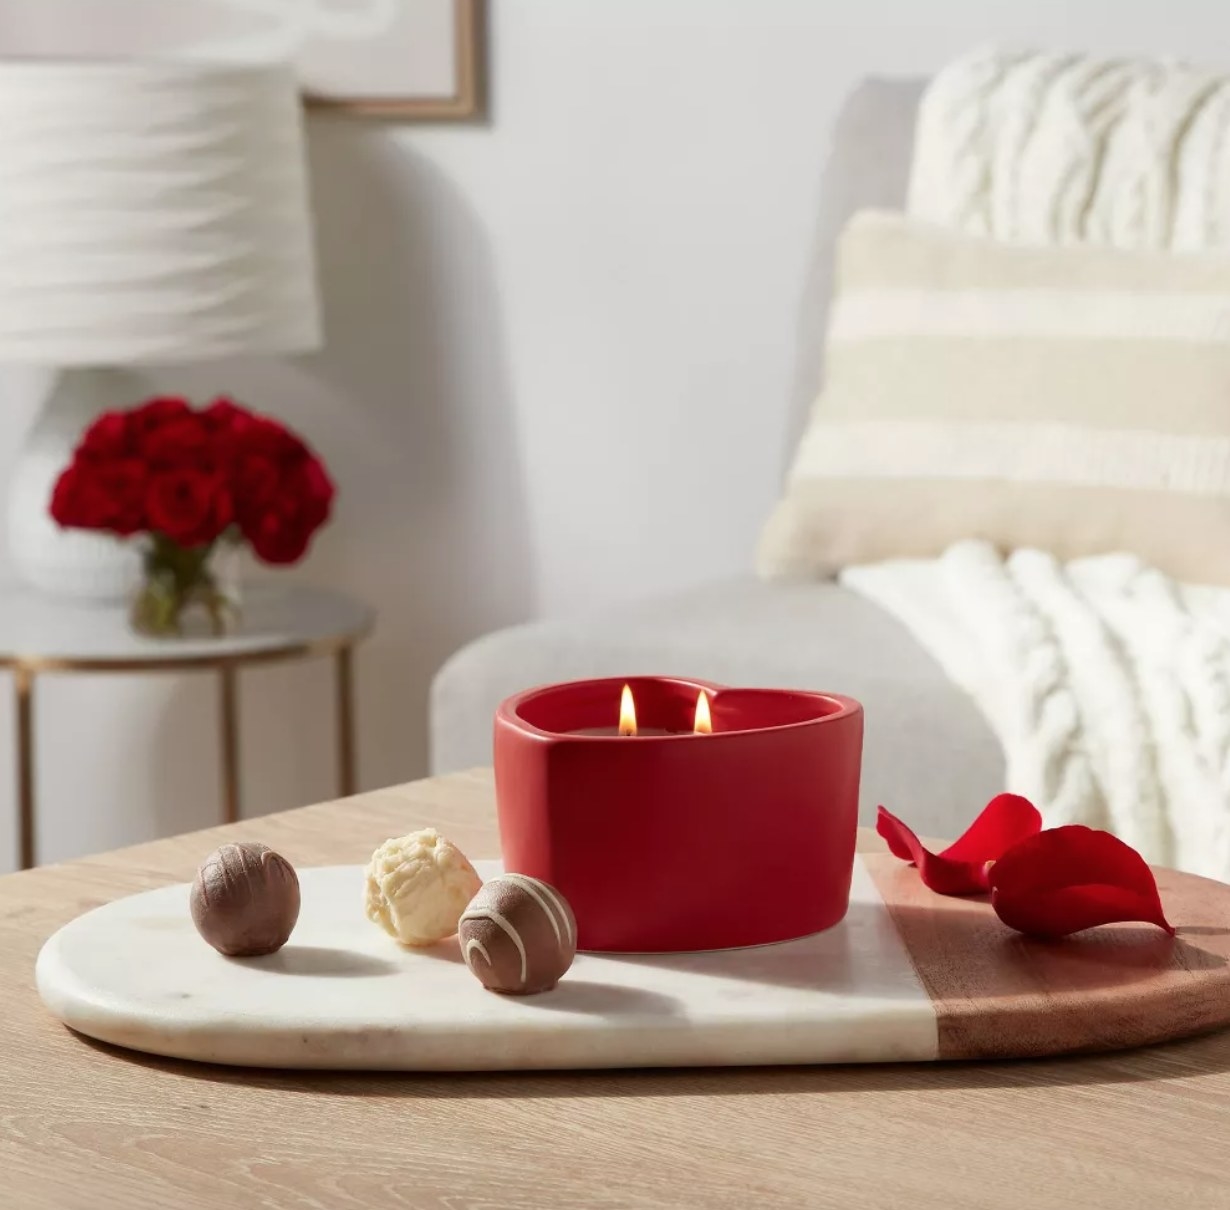 the heart shaped red ceramic candle lit on a table next to chocolate